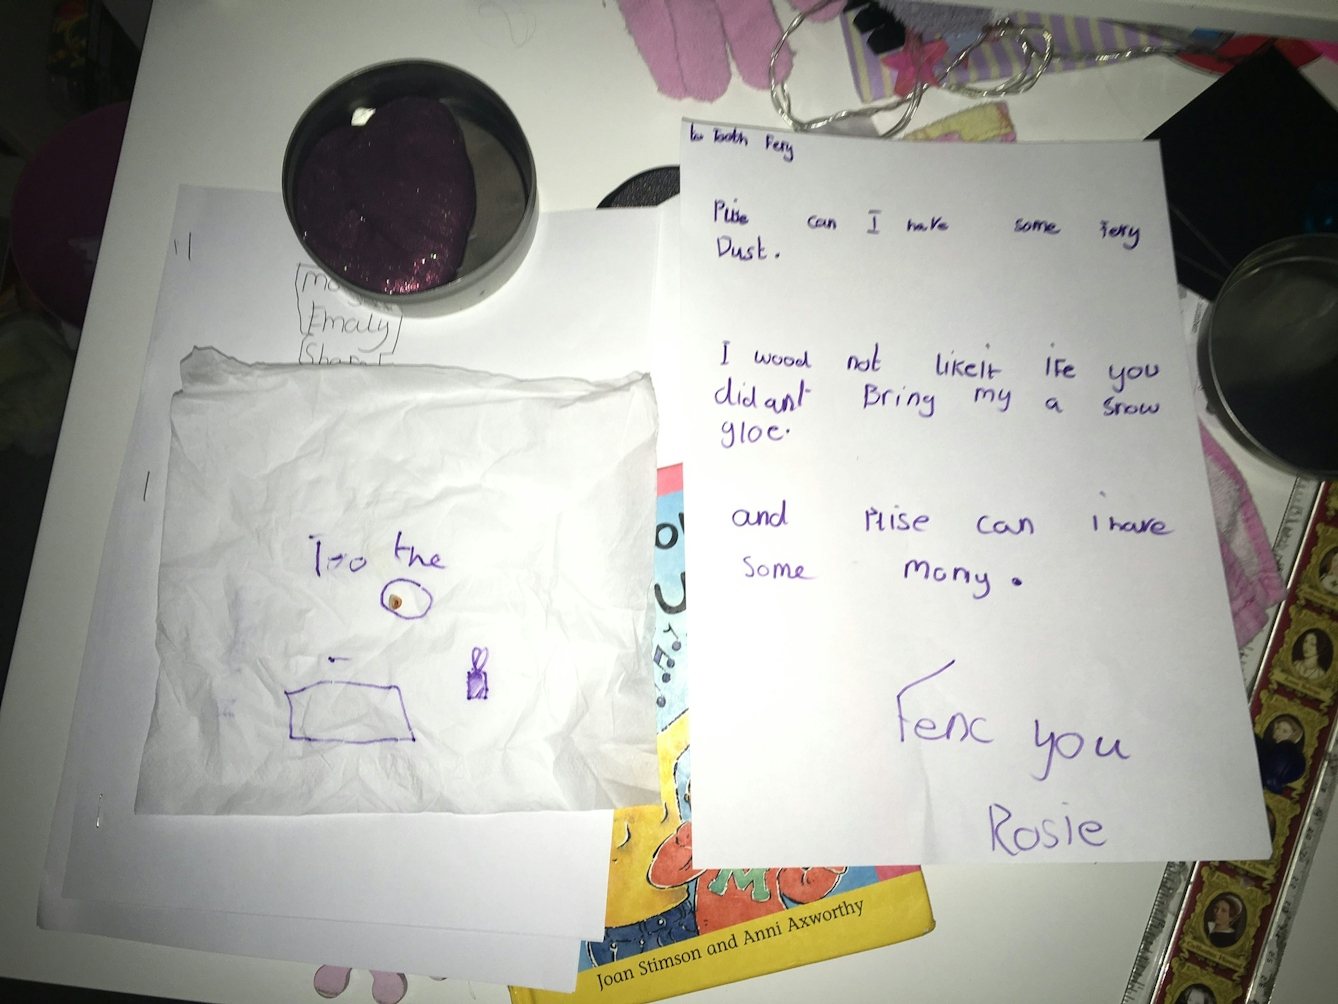 Letter written in mauve felt-tip on white paper. Reads: To Tooth Fairy. Please can I have some fairy dust. I would not like it if you didn't bring me a snow globe. And please can I have some money. Thank you, Rosie.
